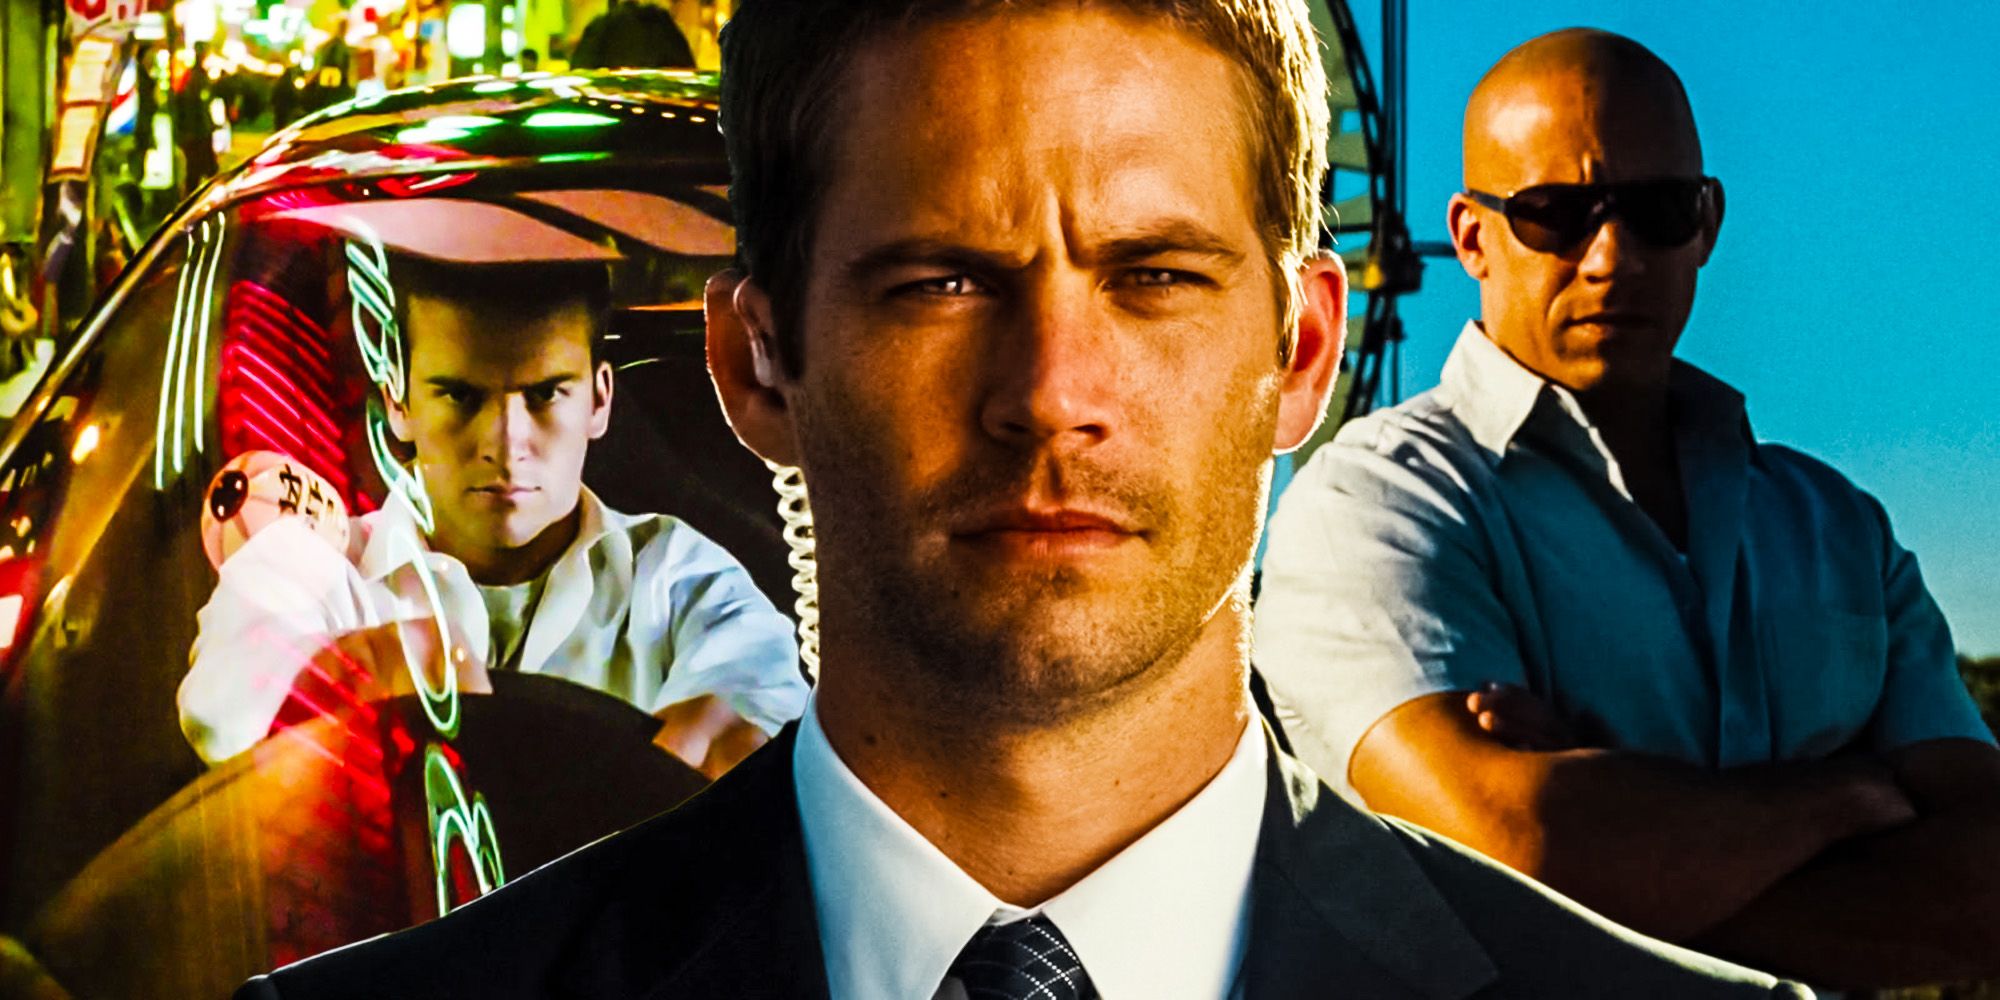 Fast & Furious Movies In Order: How to Watch Fast Saga Chronologically